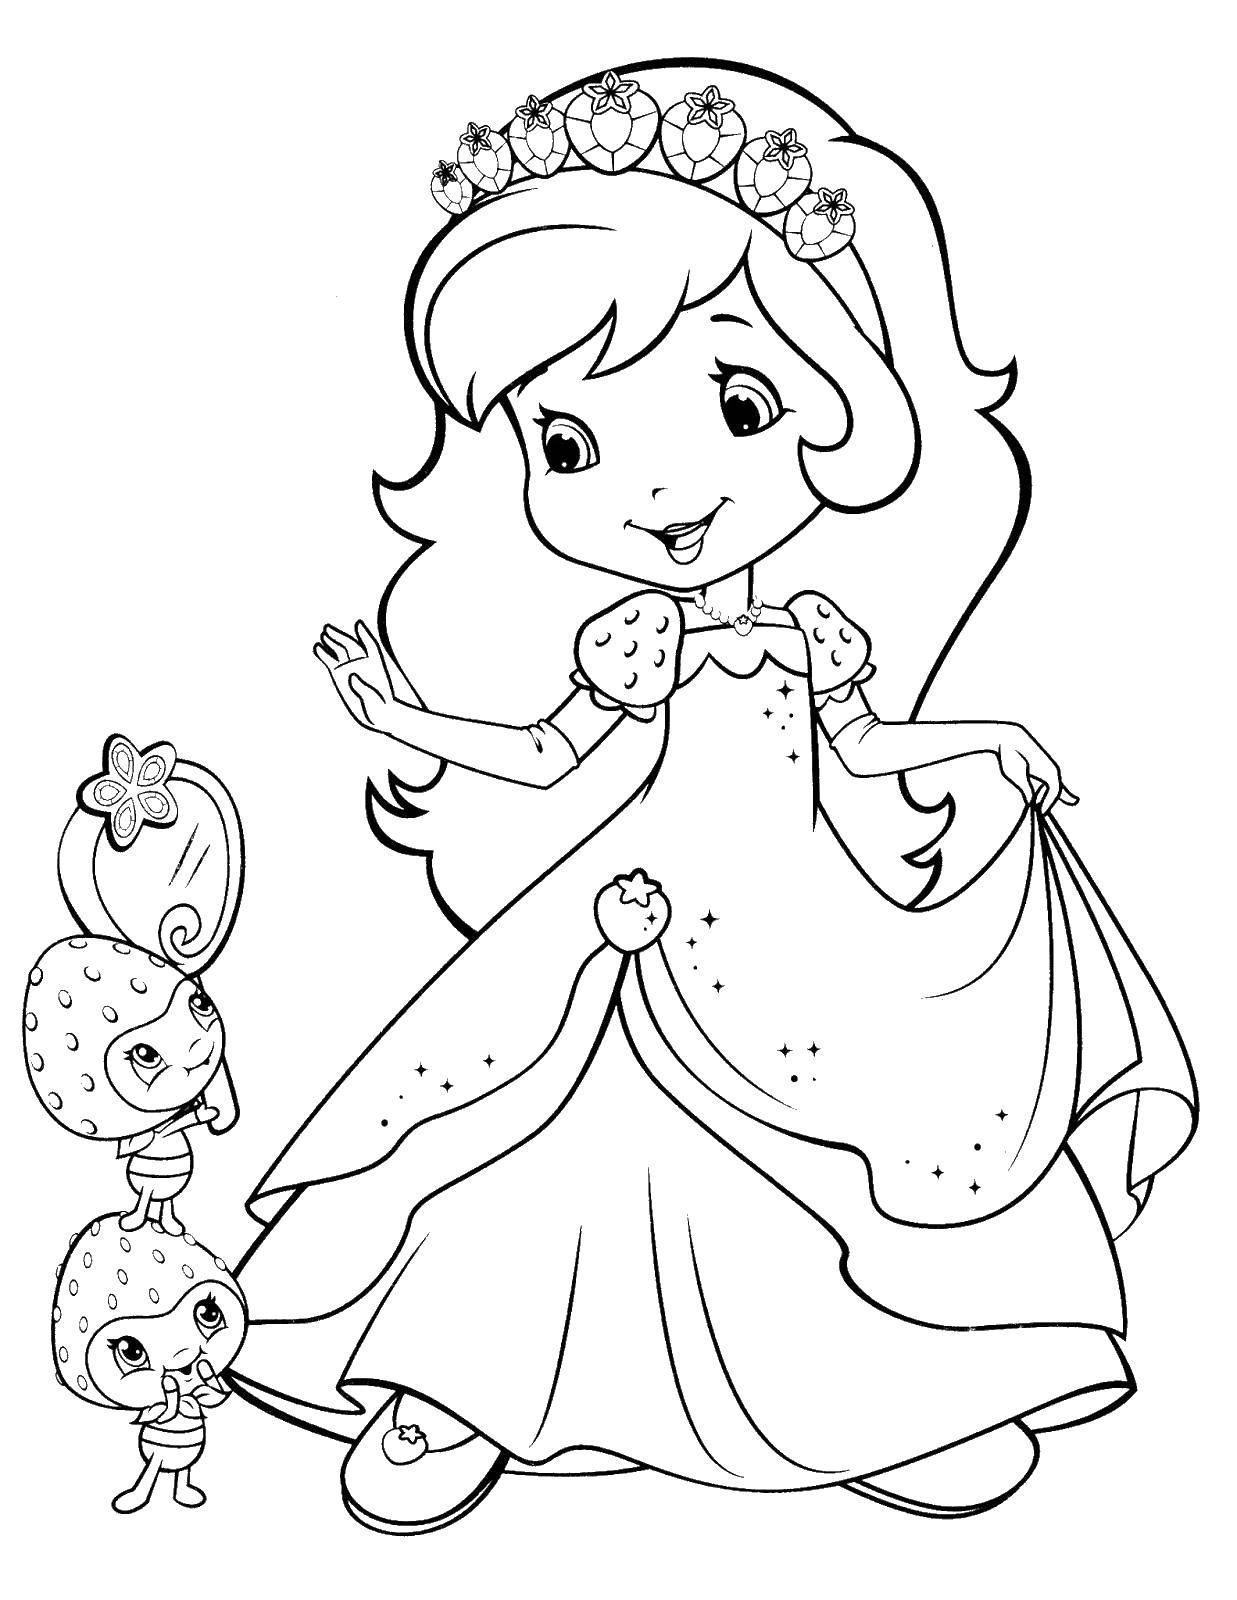 Coloring Charlotte tries on a dress. Category coloring pages for girls. Tags:  Charlotte, cartoon.